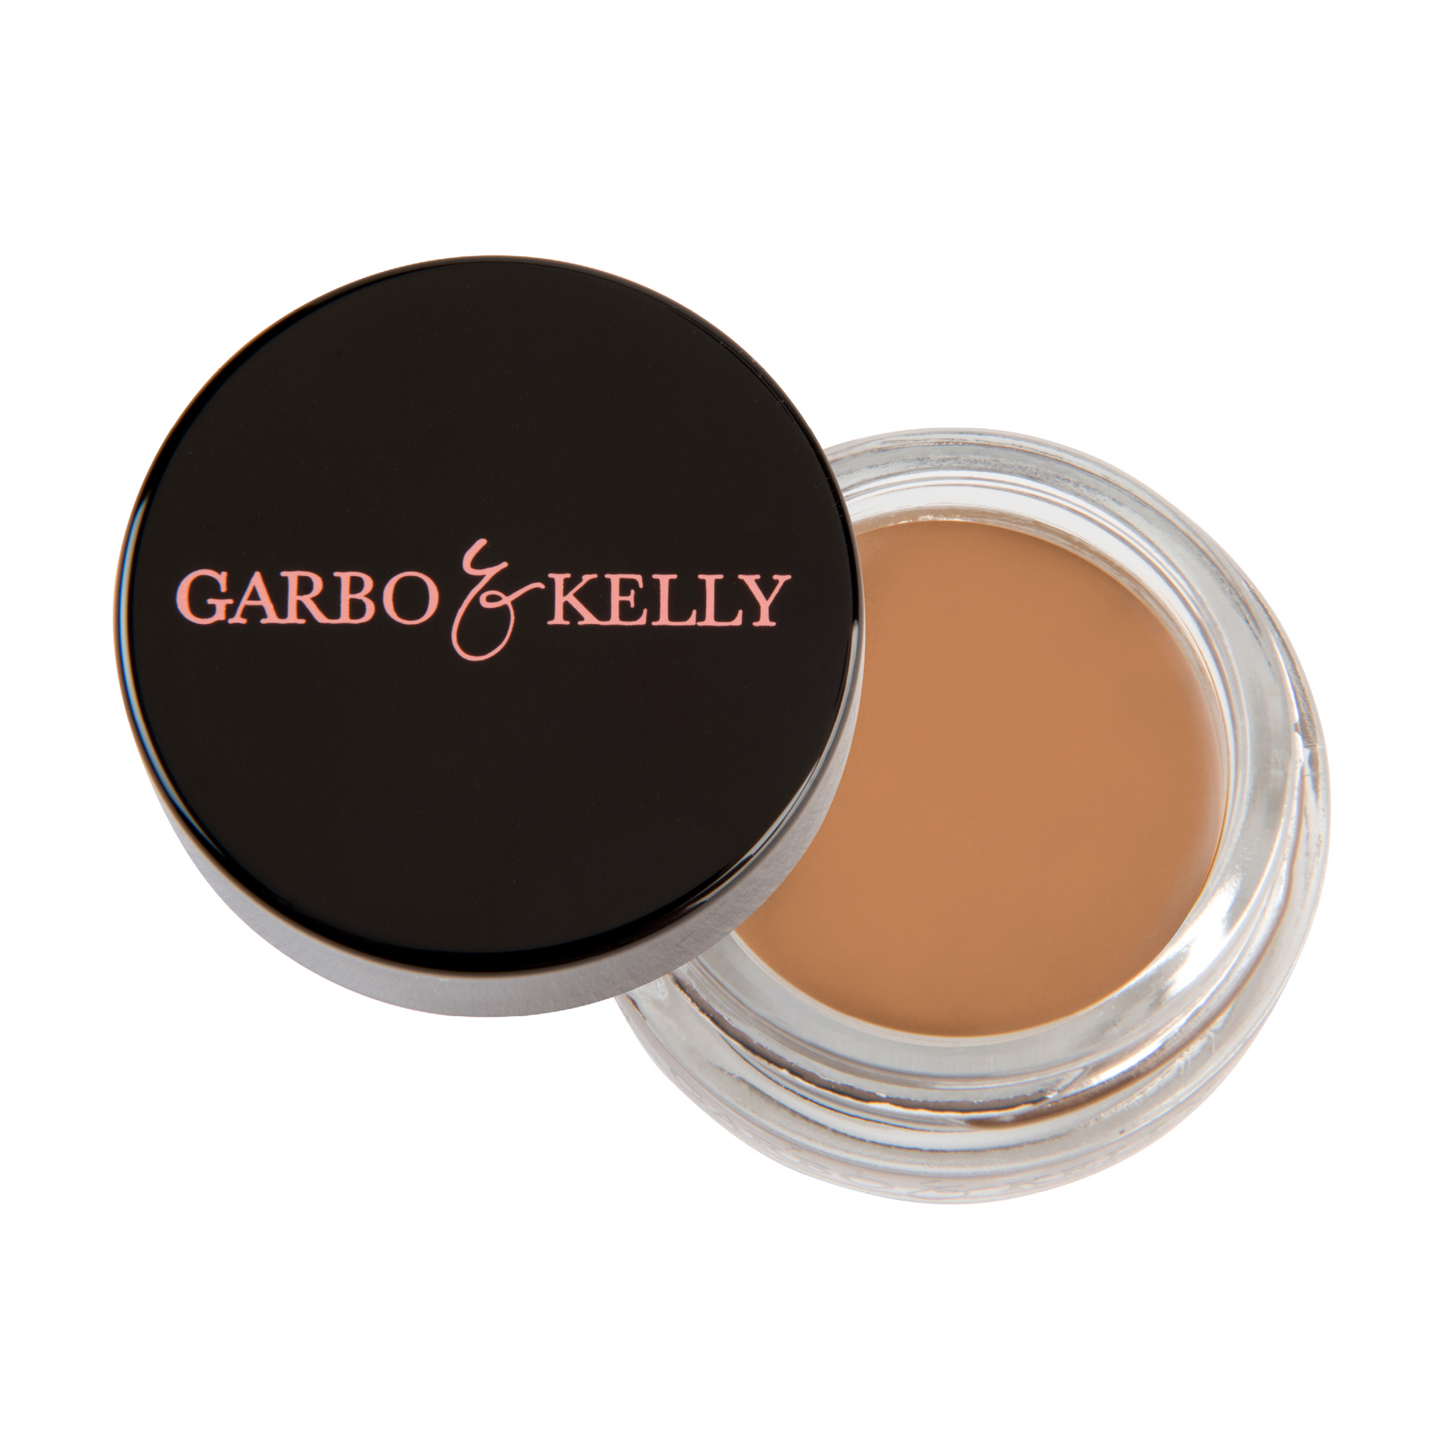 Garbo and kelly - brow pomade